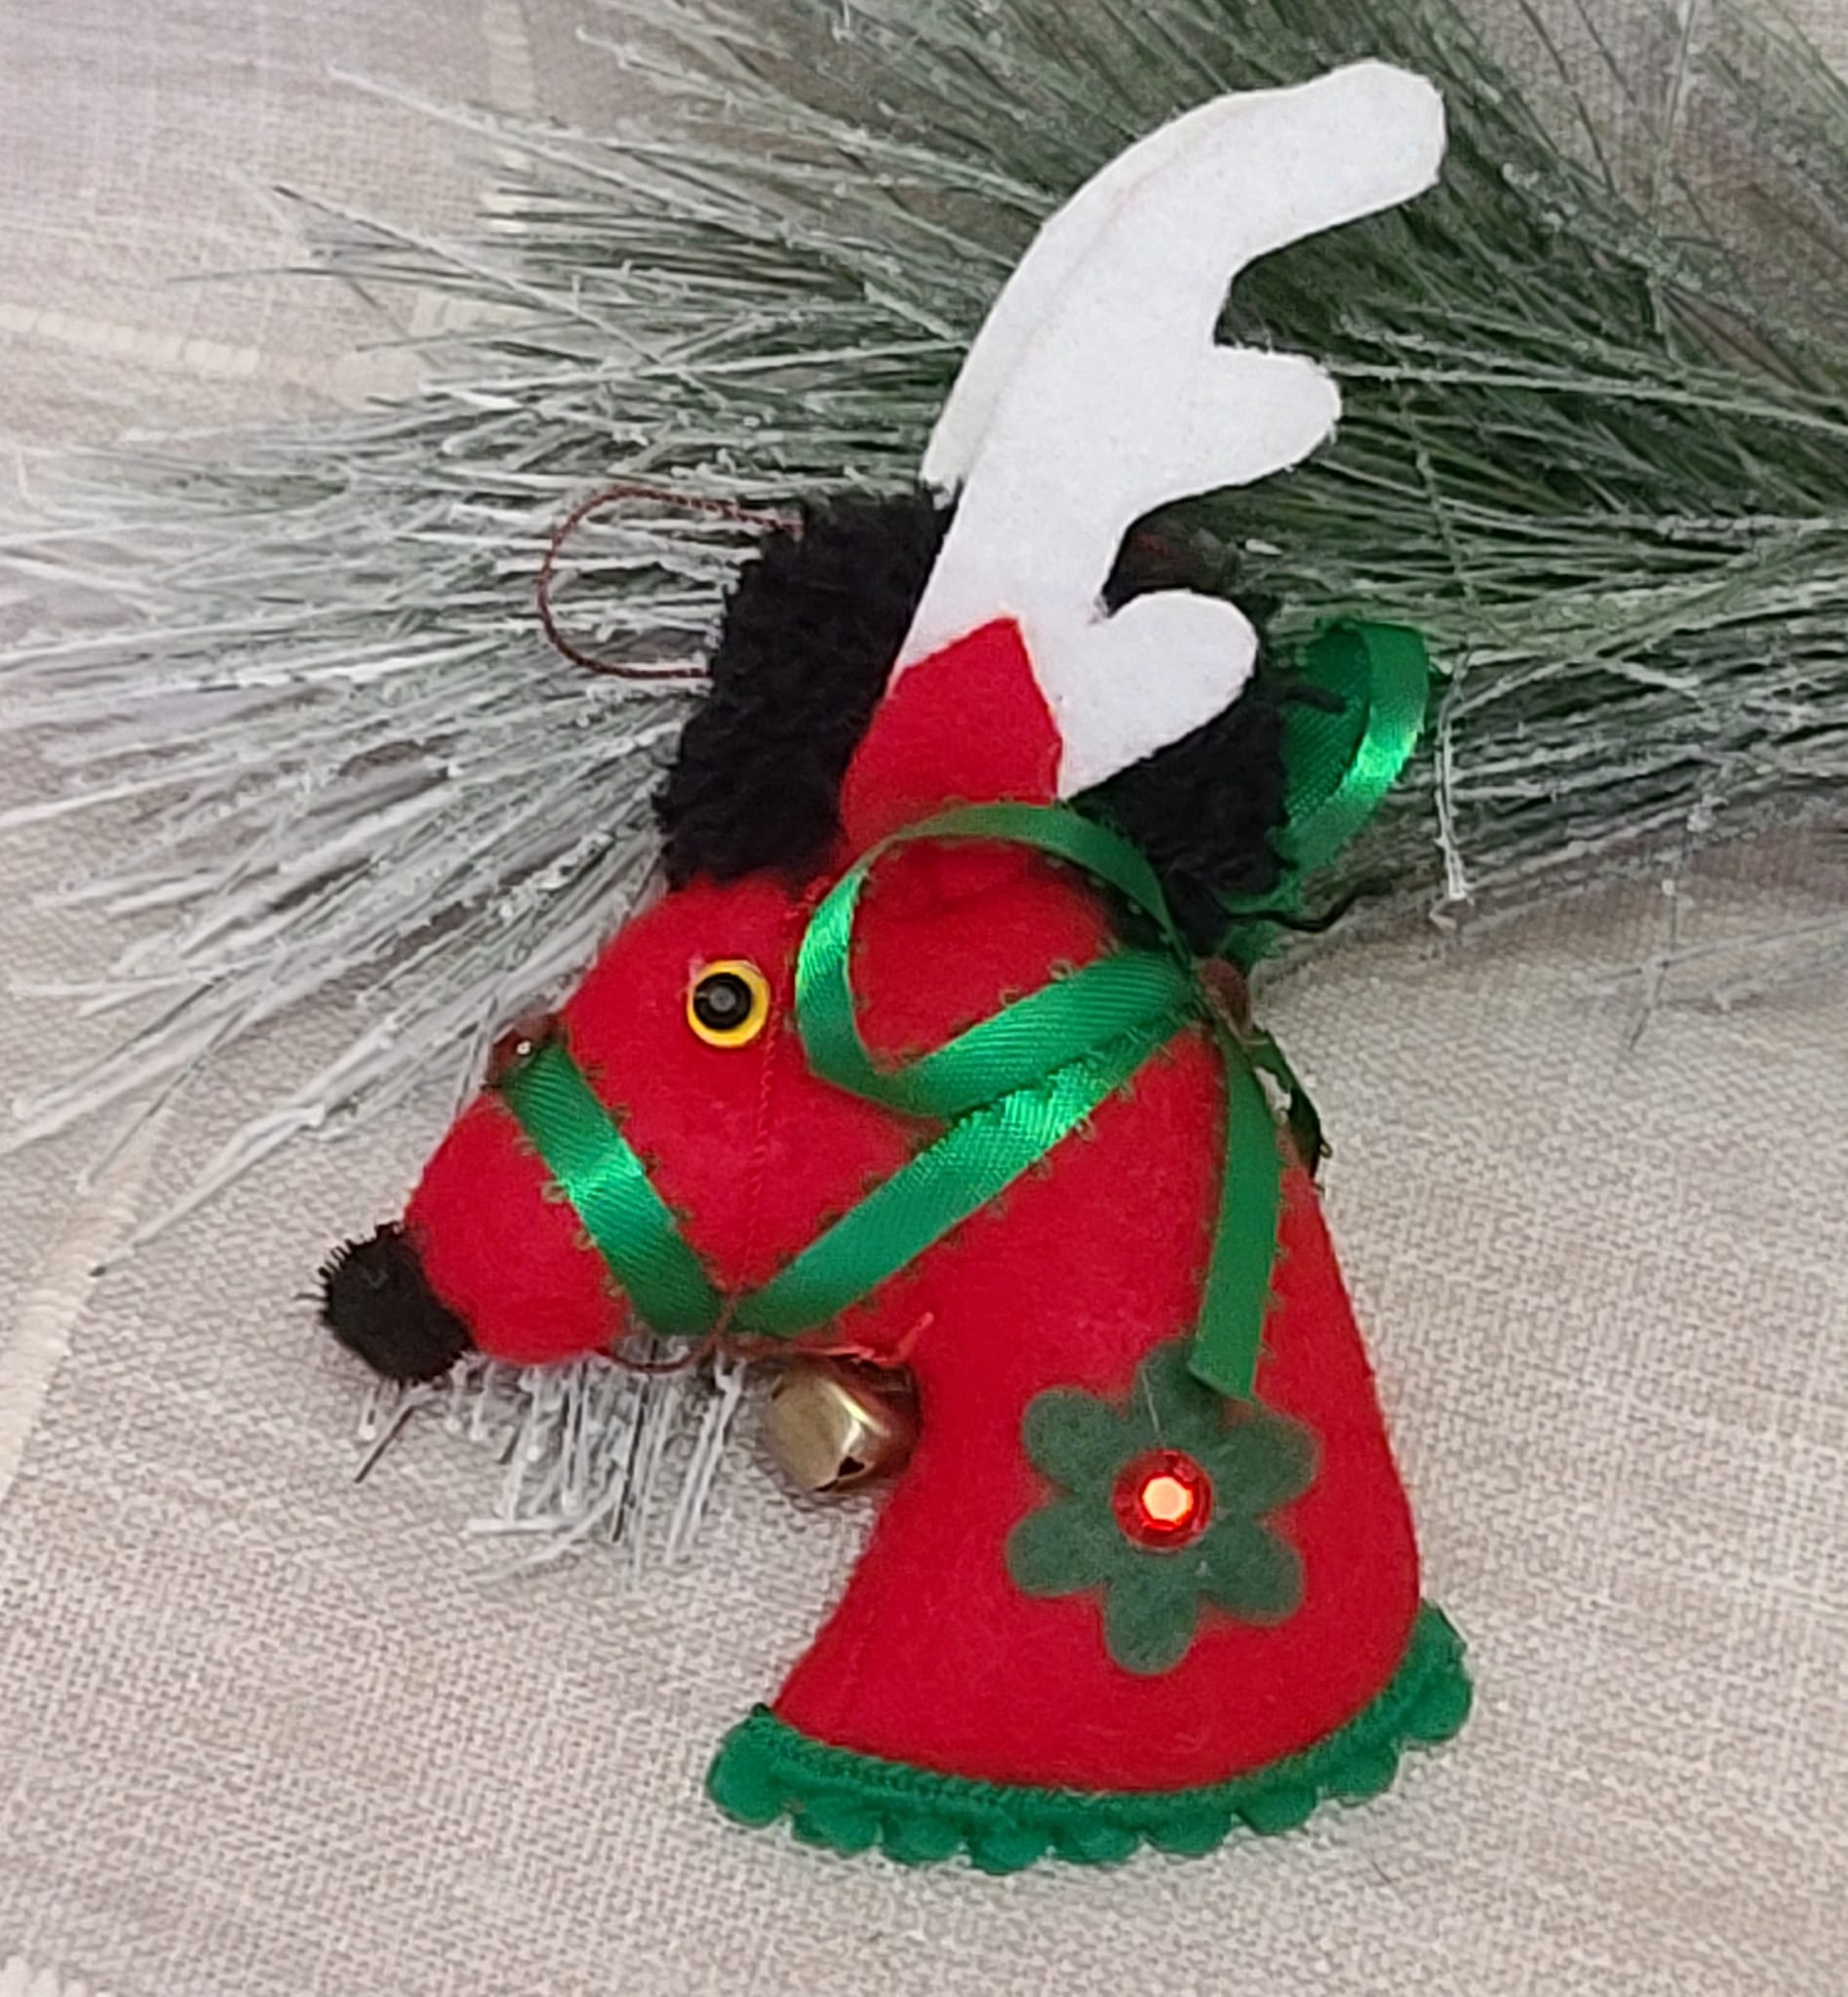 Felt reindeer christmas ornament - Red with green trim